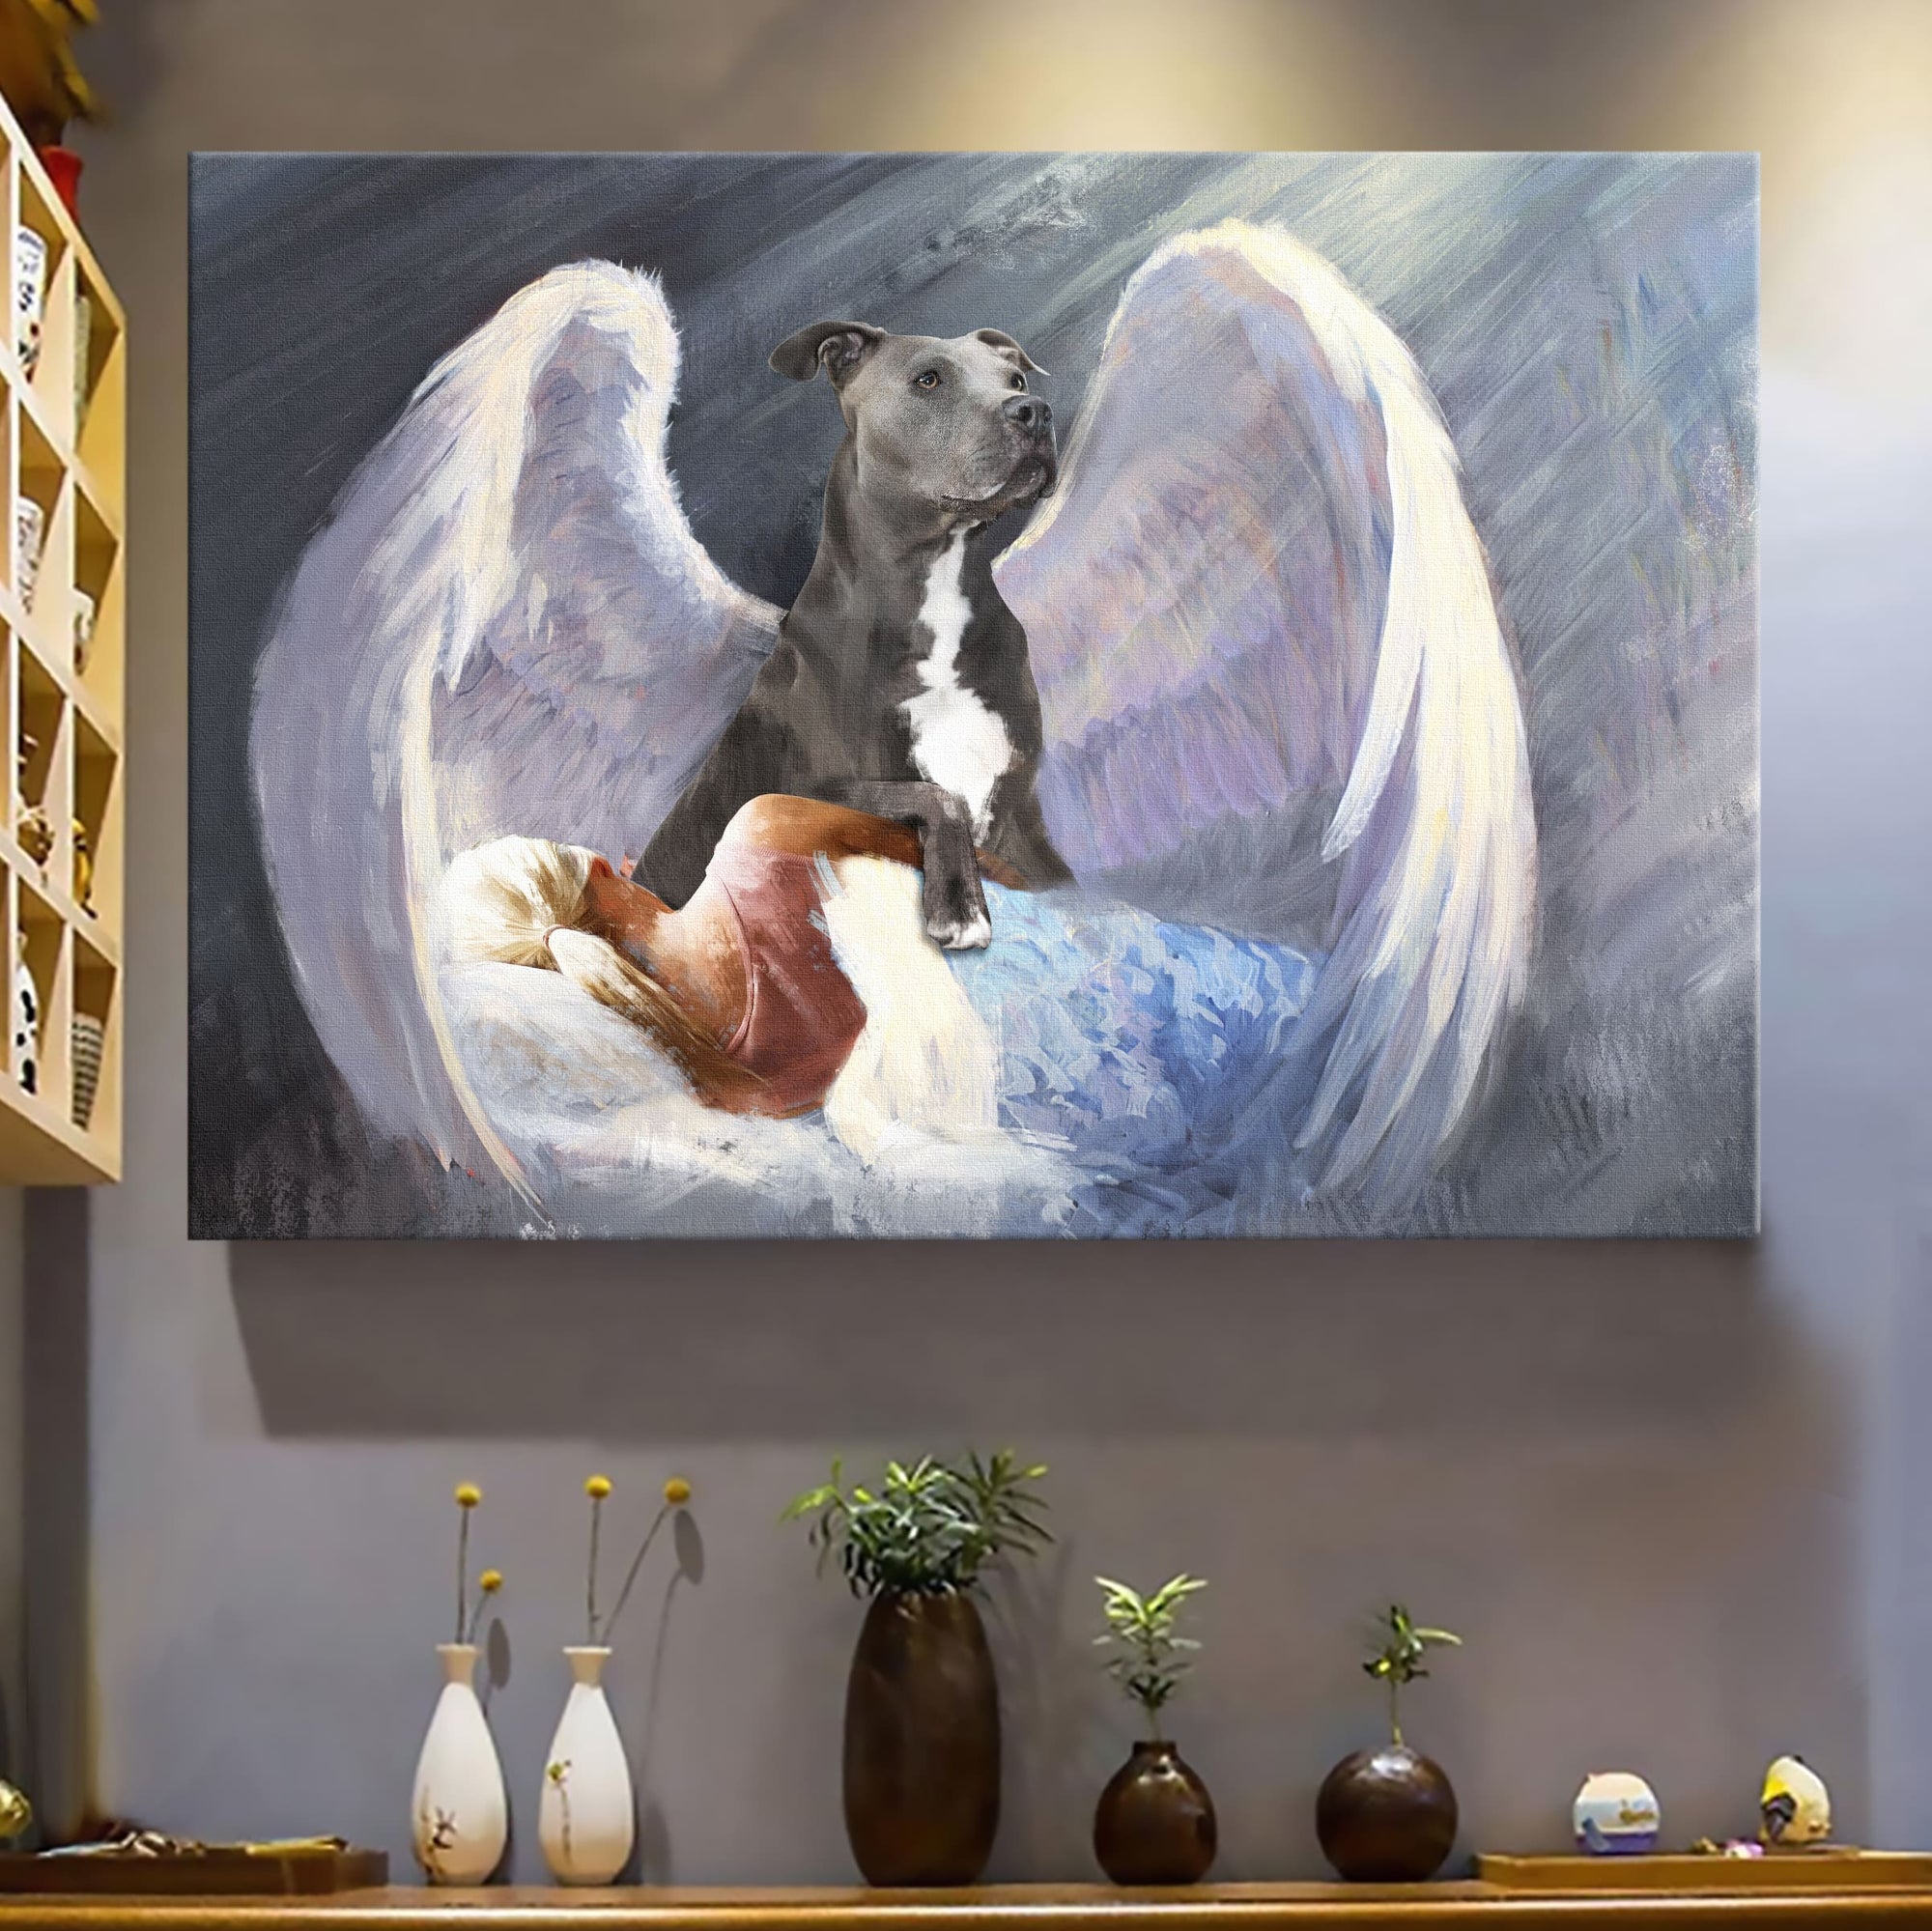 Sleeping girl, Pit bull, Beautiful Wings, I'll protect you - Pit bull Landscape Canvas Prints, Wall Art